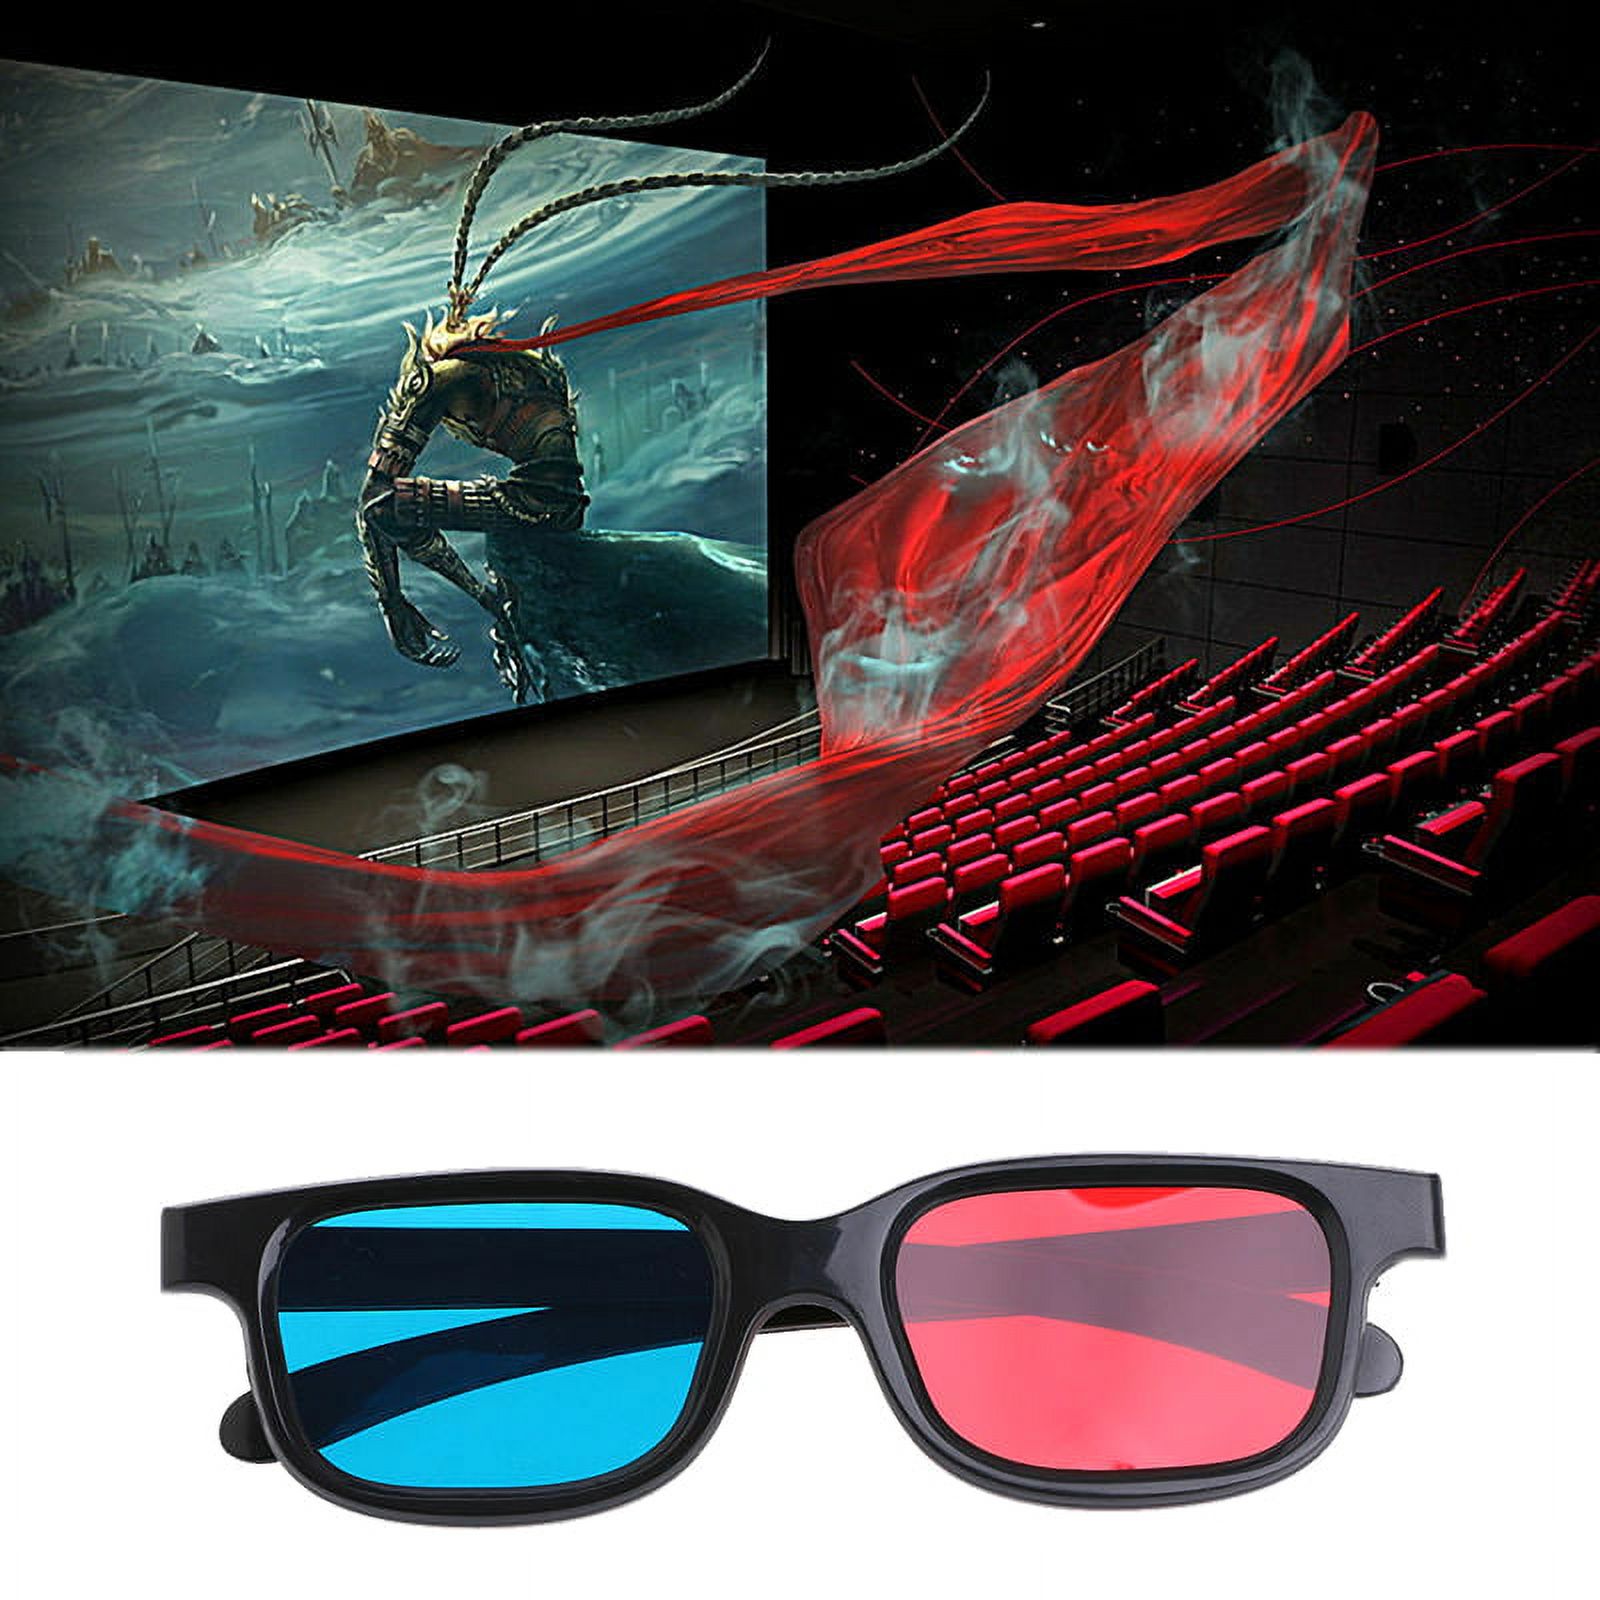 Universal red blue 3d glasses for dimensional anaglyph movie game - image 1 of 9